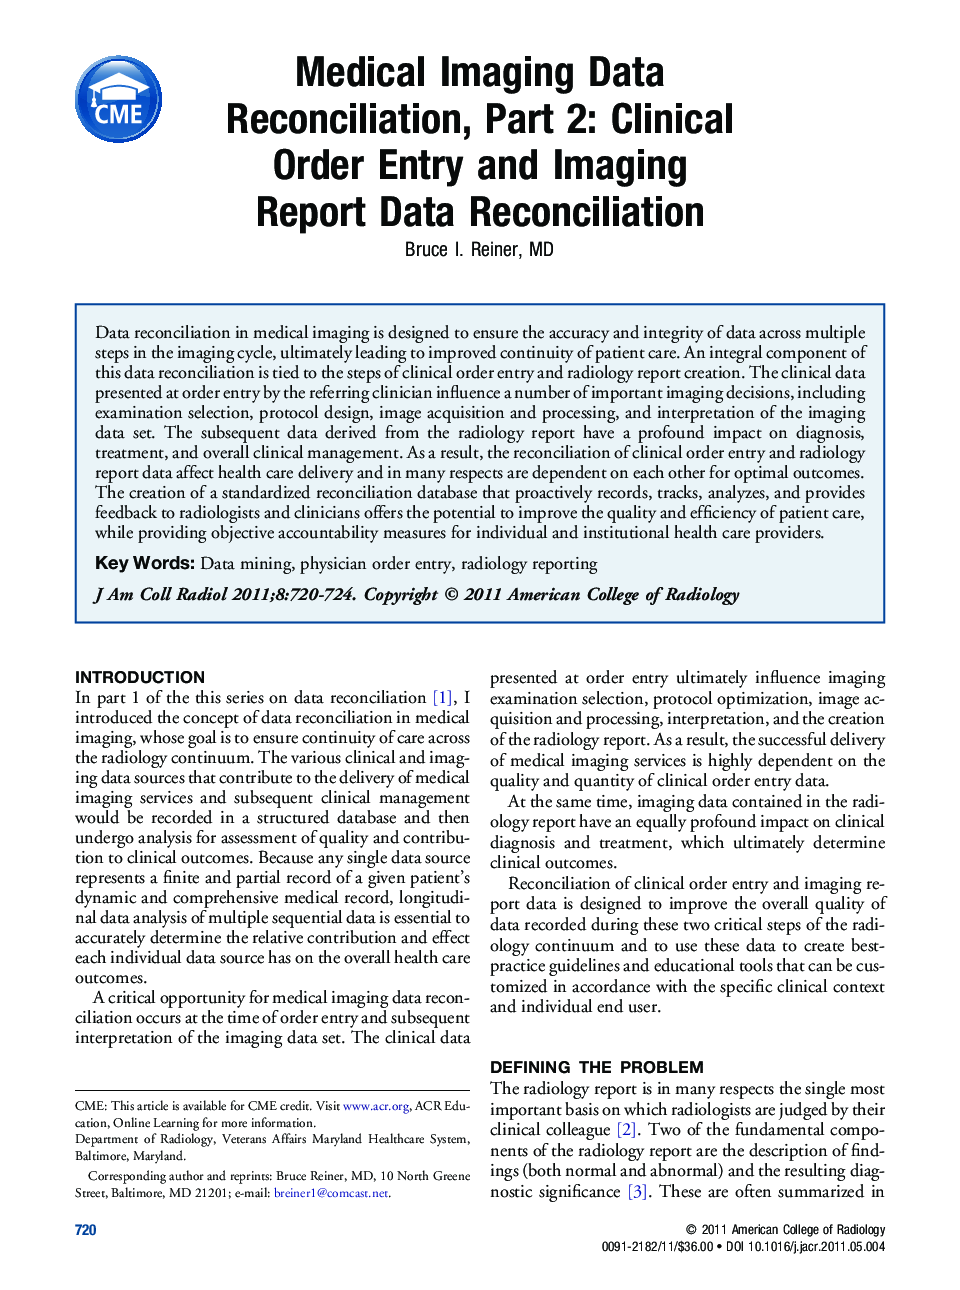 Medical Imaging Data Reconciliation, Part 2: Clinical Order Entry and Imaging Report Data Reconciliation